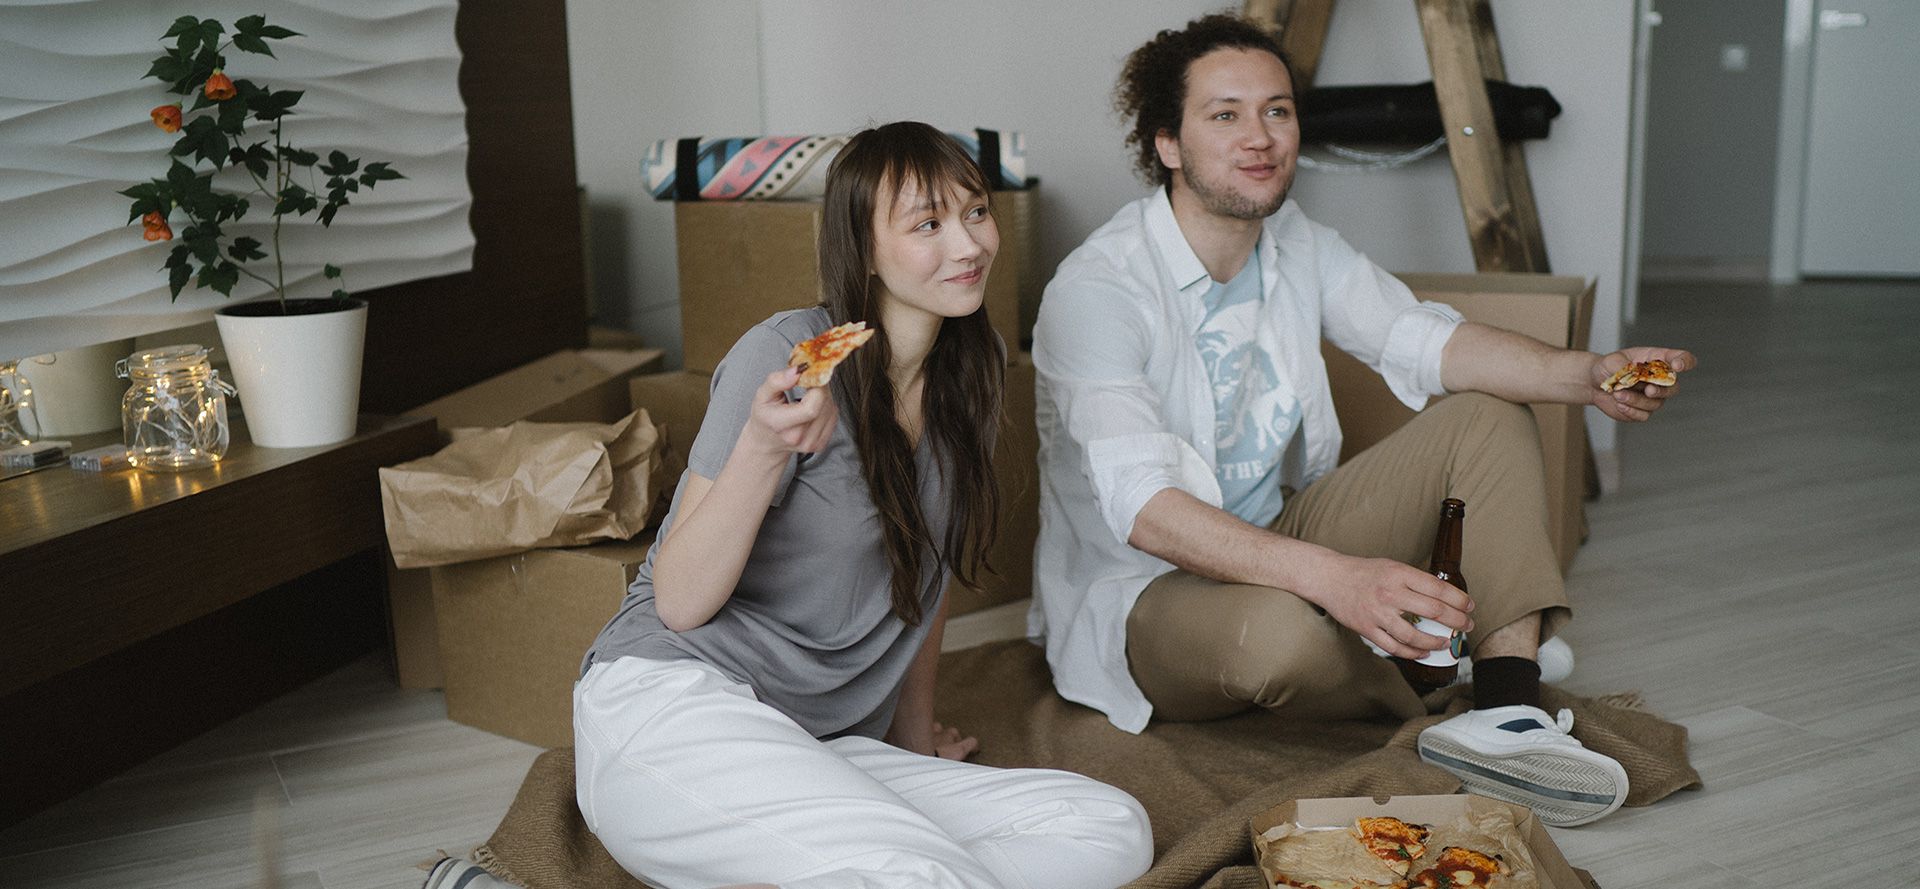 Couple eating pizza on a date.